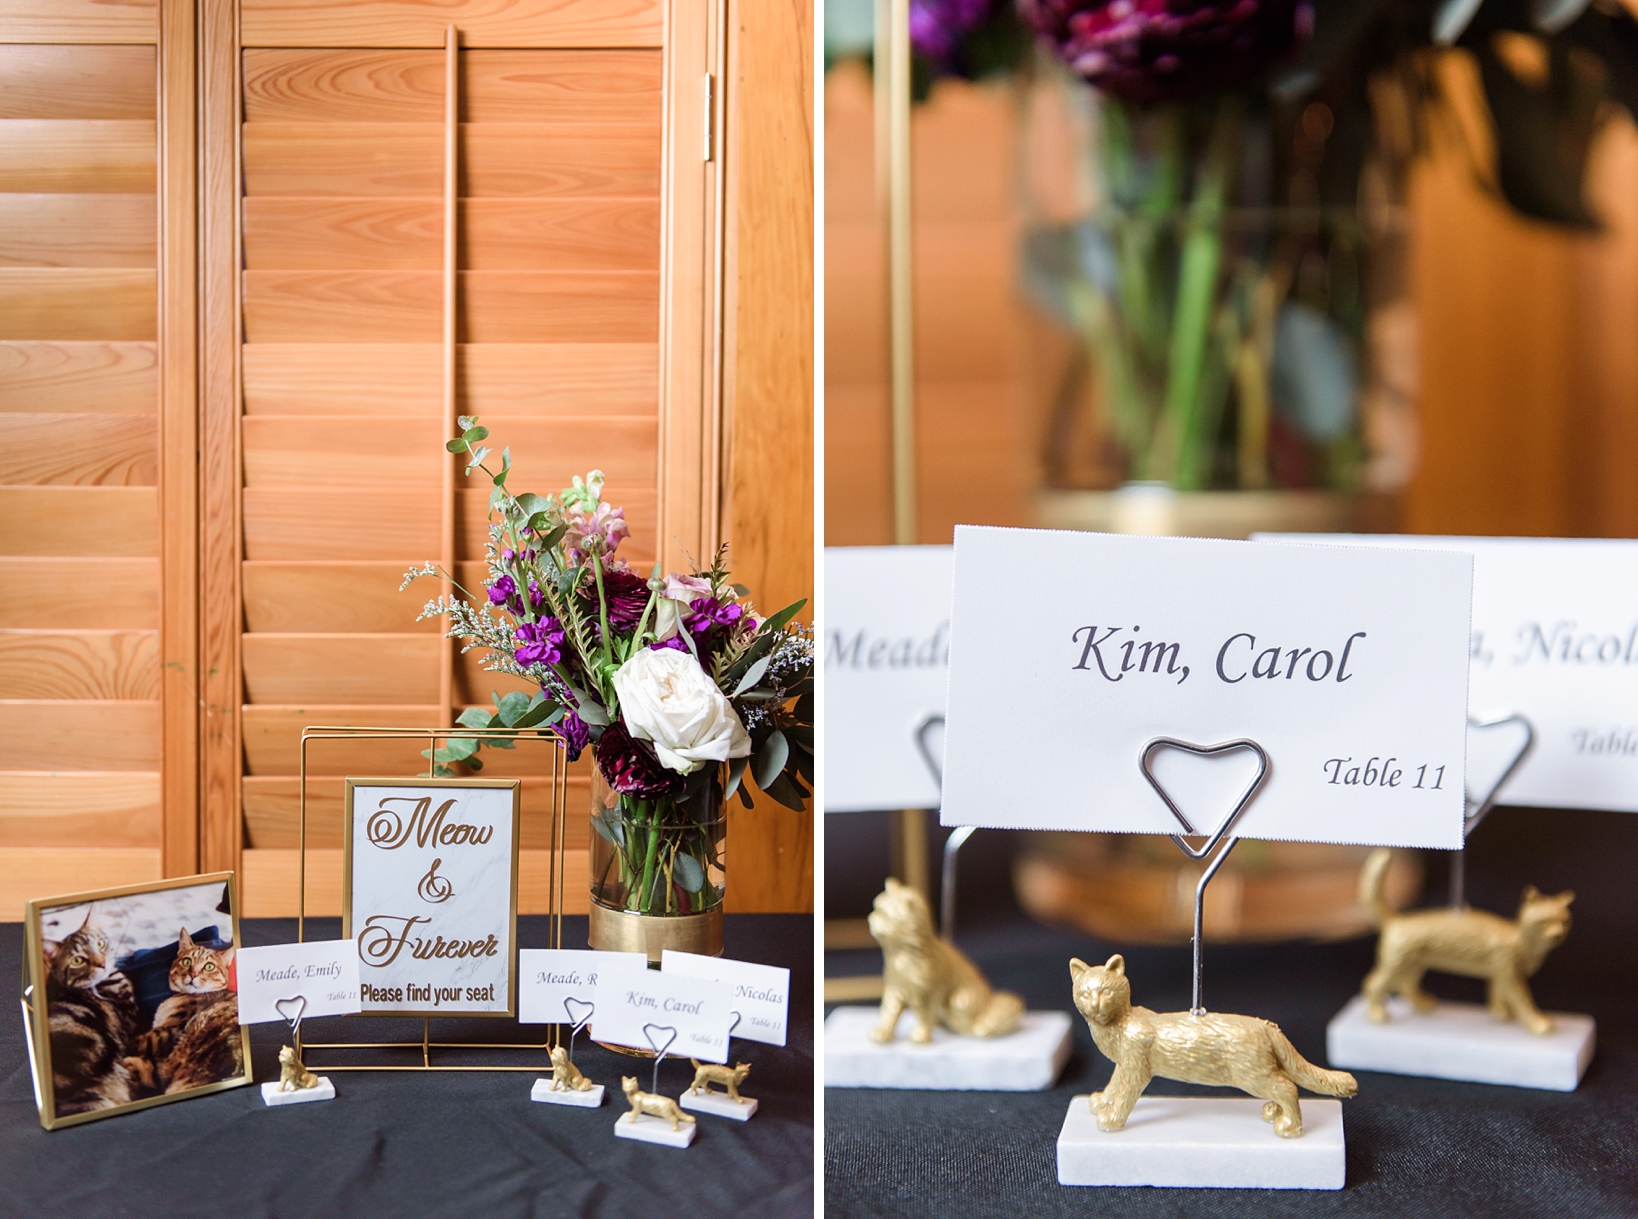 Reception details including table numbers with statues of cats